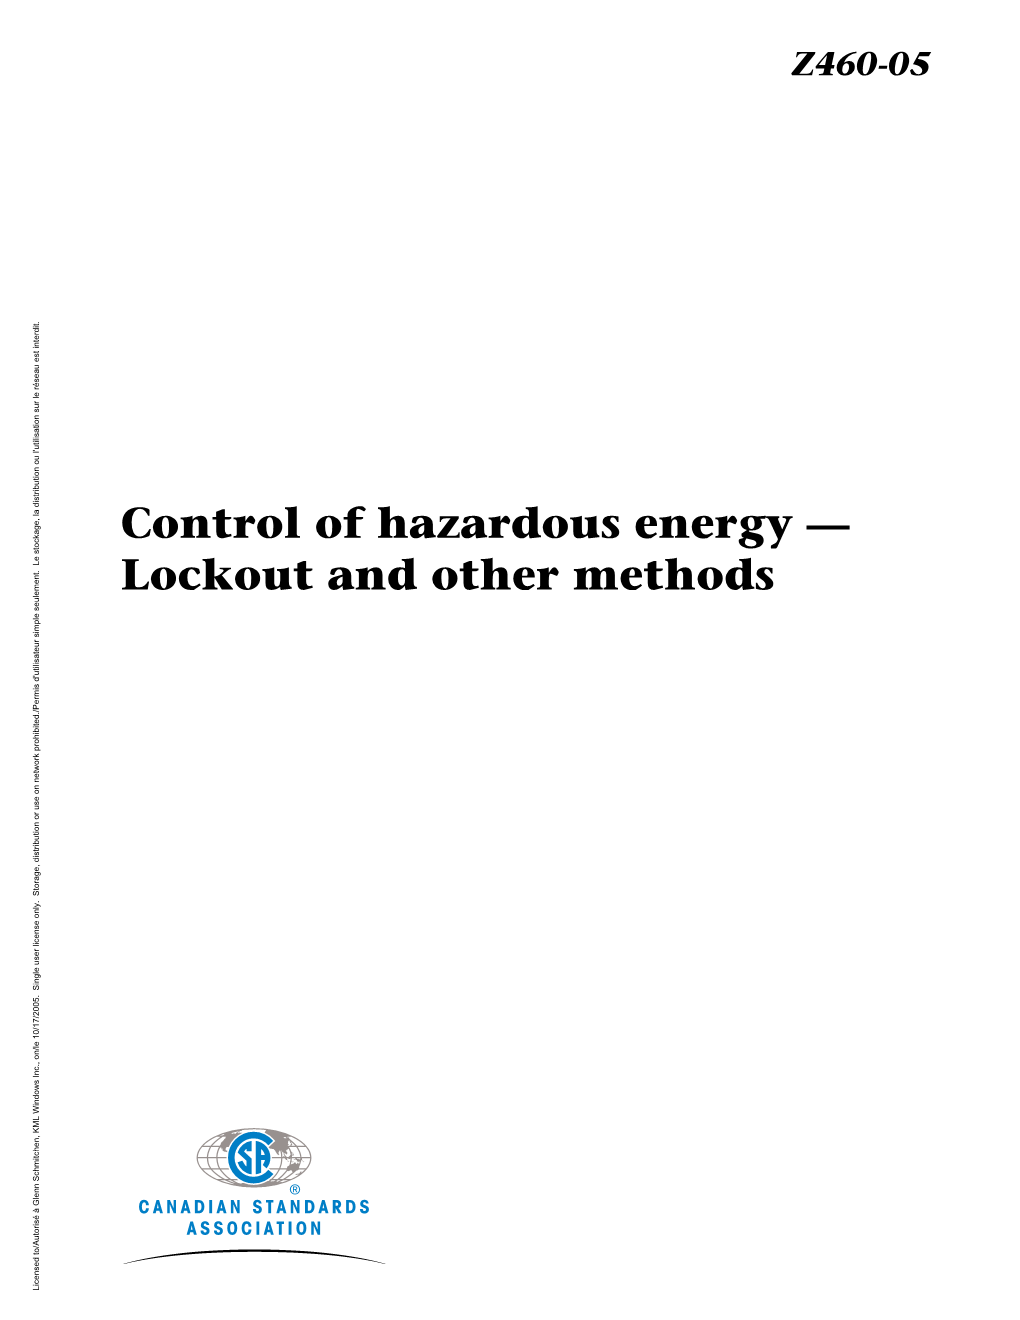 Z460-05 Control of Hazardous Energy — Lockout and Other Methods